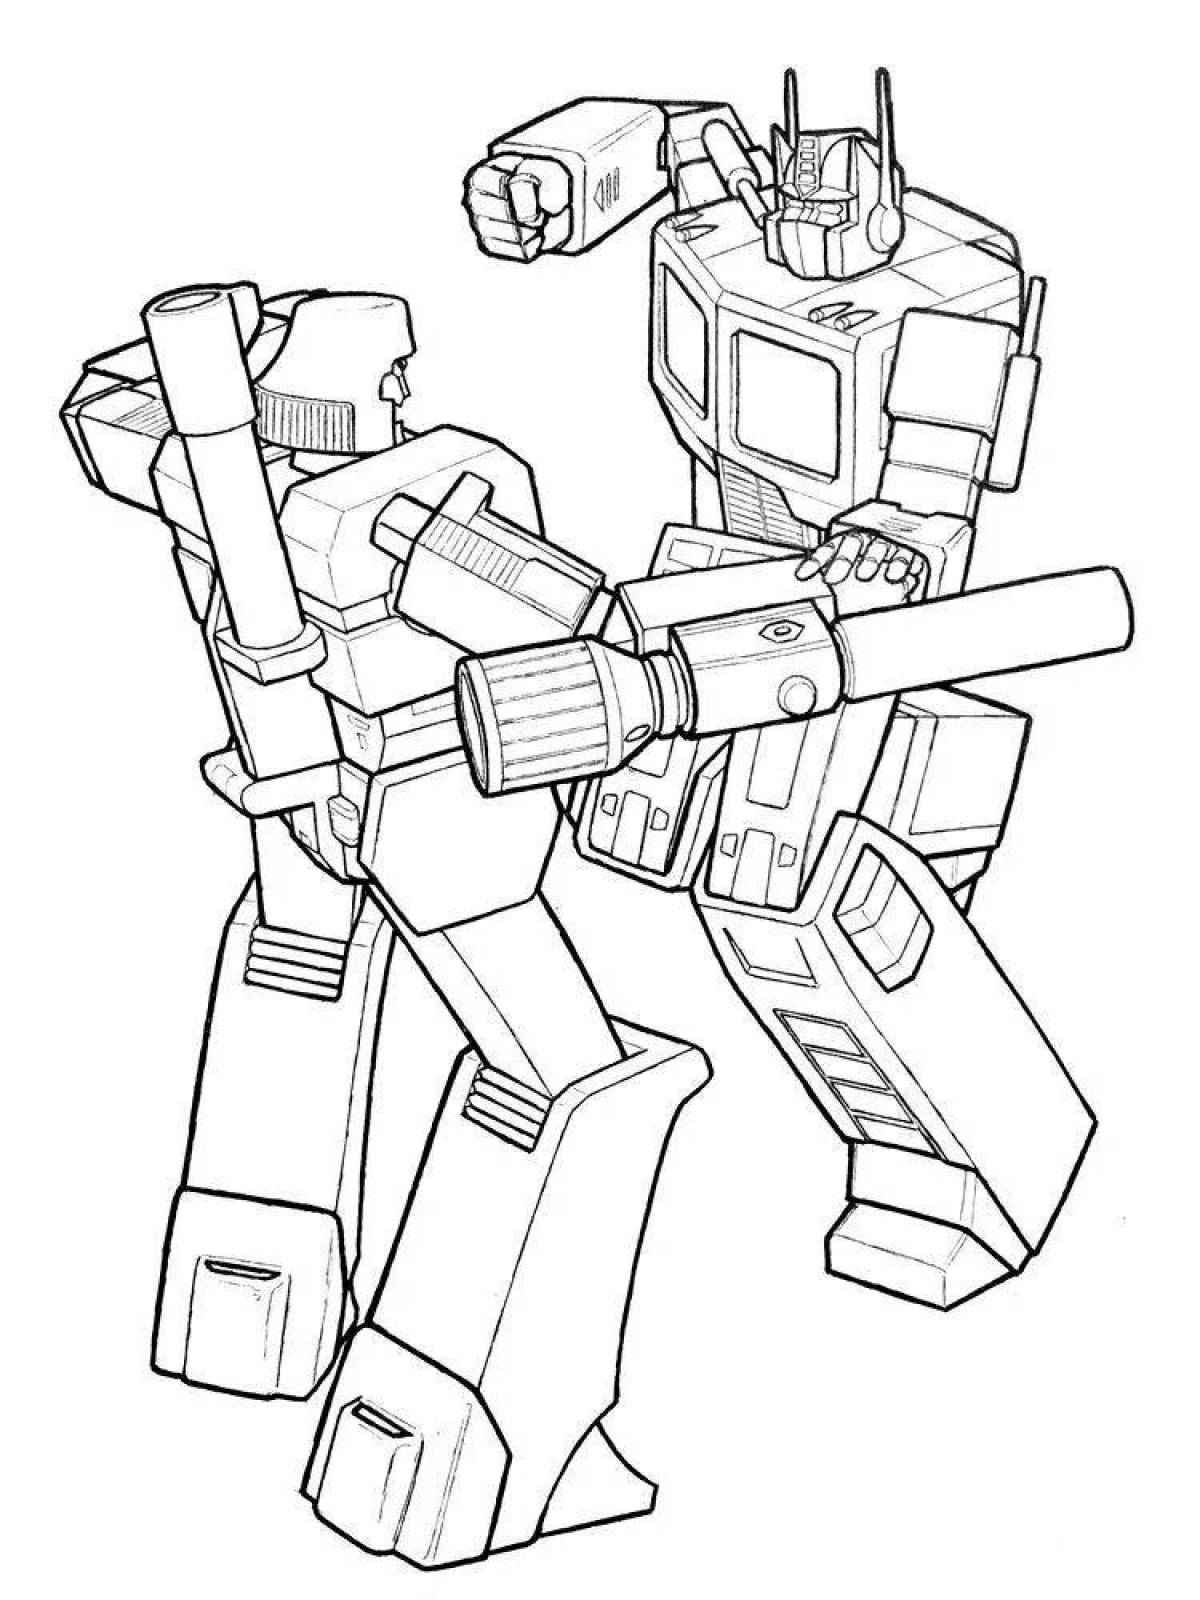 Optimus prime shiny coloring page